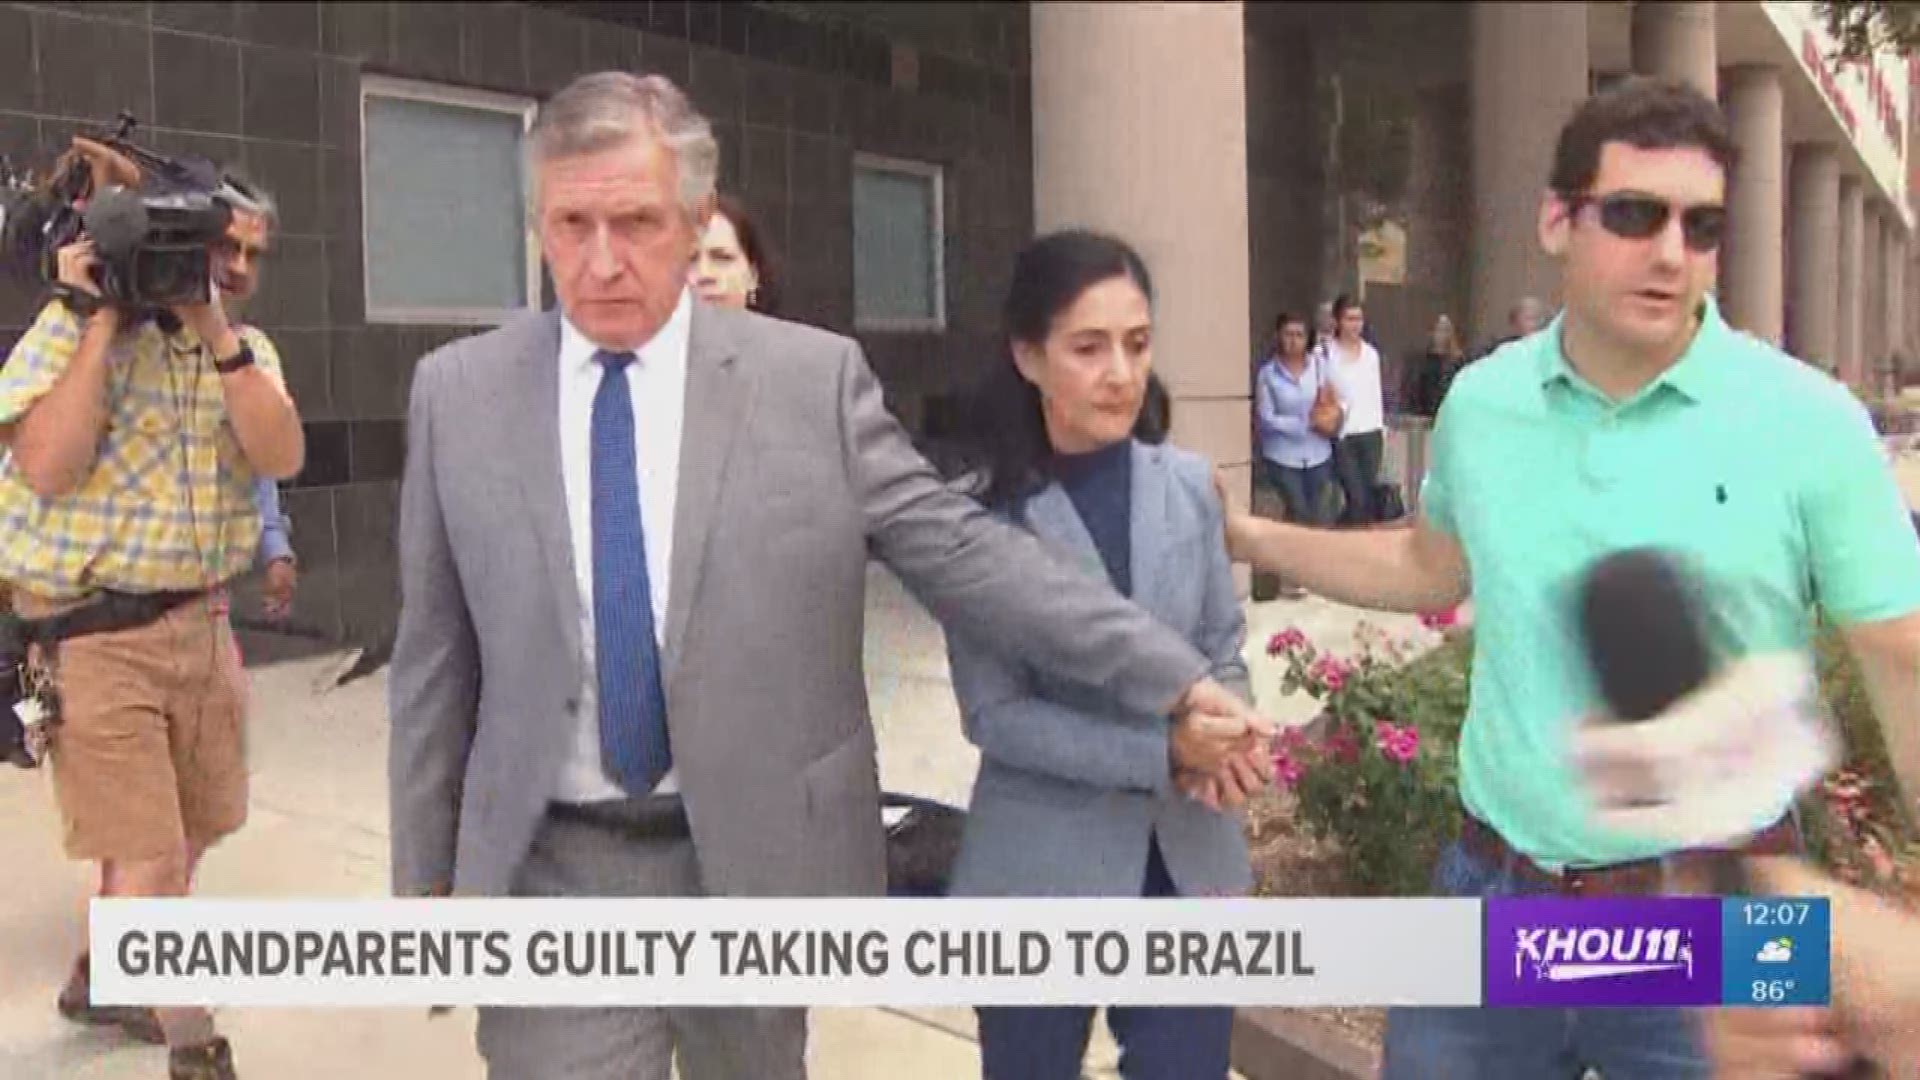 The couple accused in the international kidnapping case involving their grandson was found guilty Friday morning in a Houston courtroom. Jurors found Carlos and Jemima Guimaraes guilty of kidnapping but not guilty of conspiracy. Prosecutors said the coupl